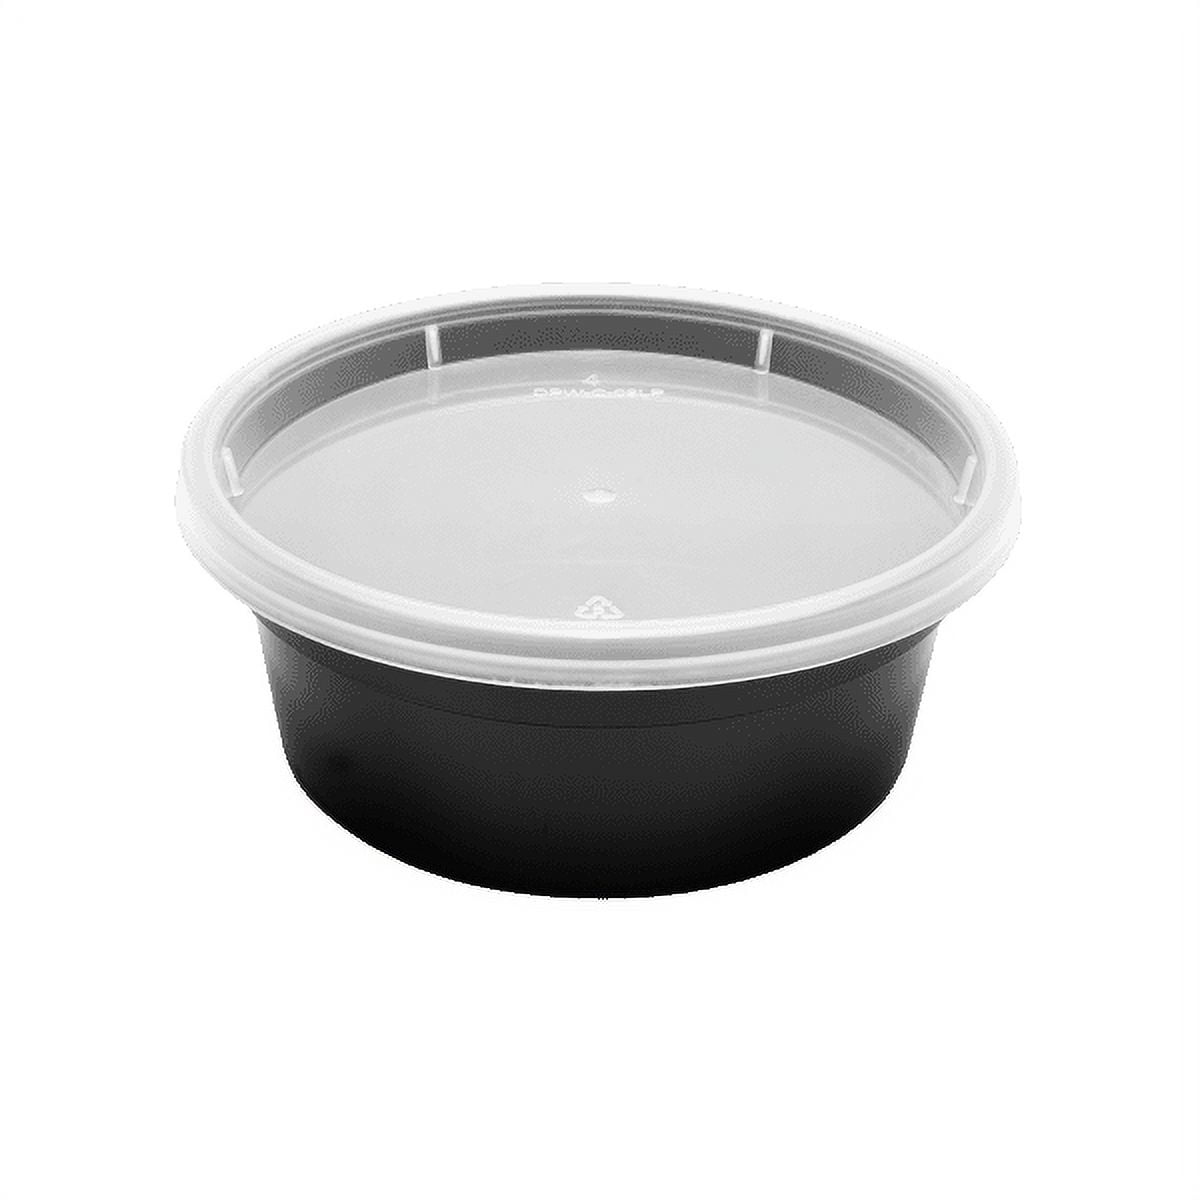 Plastic Deli Cup and Lid - 8 oz - 240 Qty – Bakers Authority